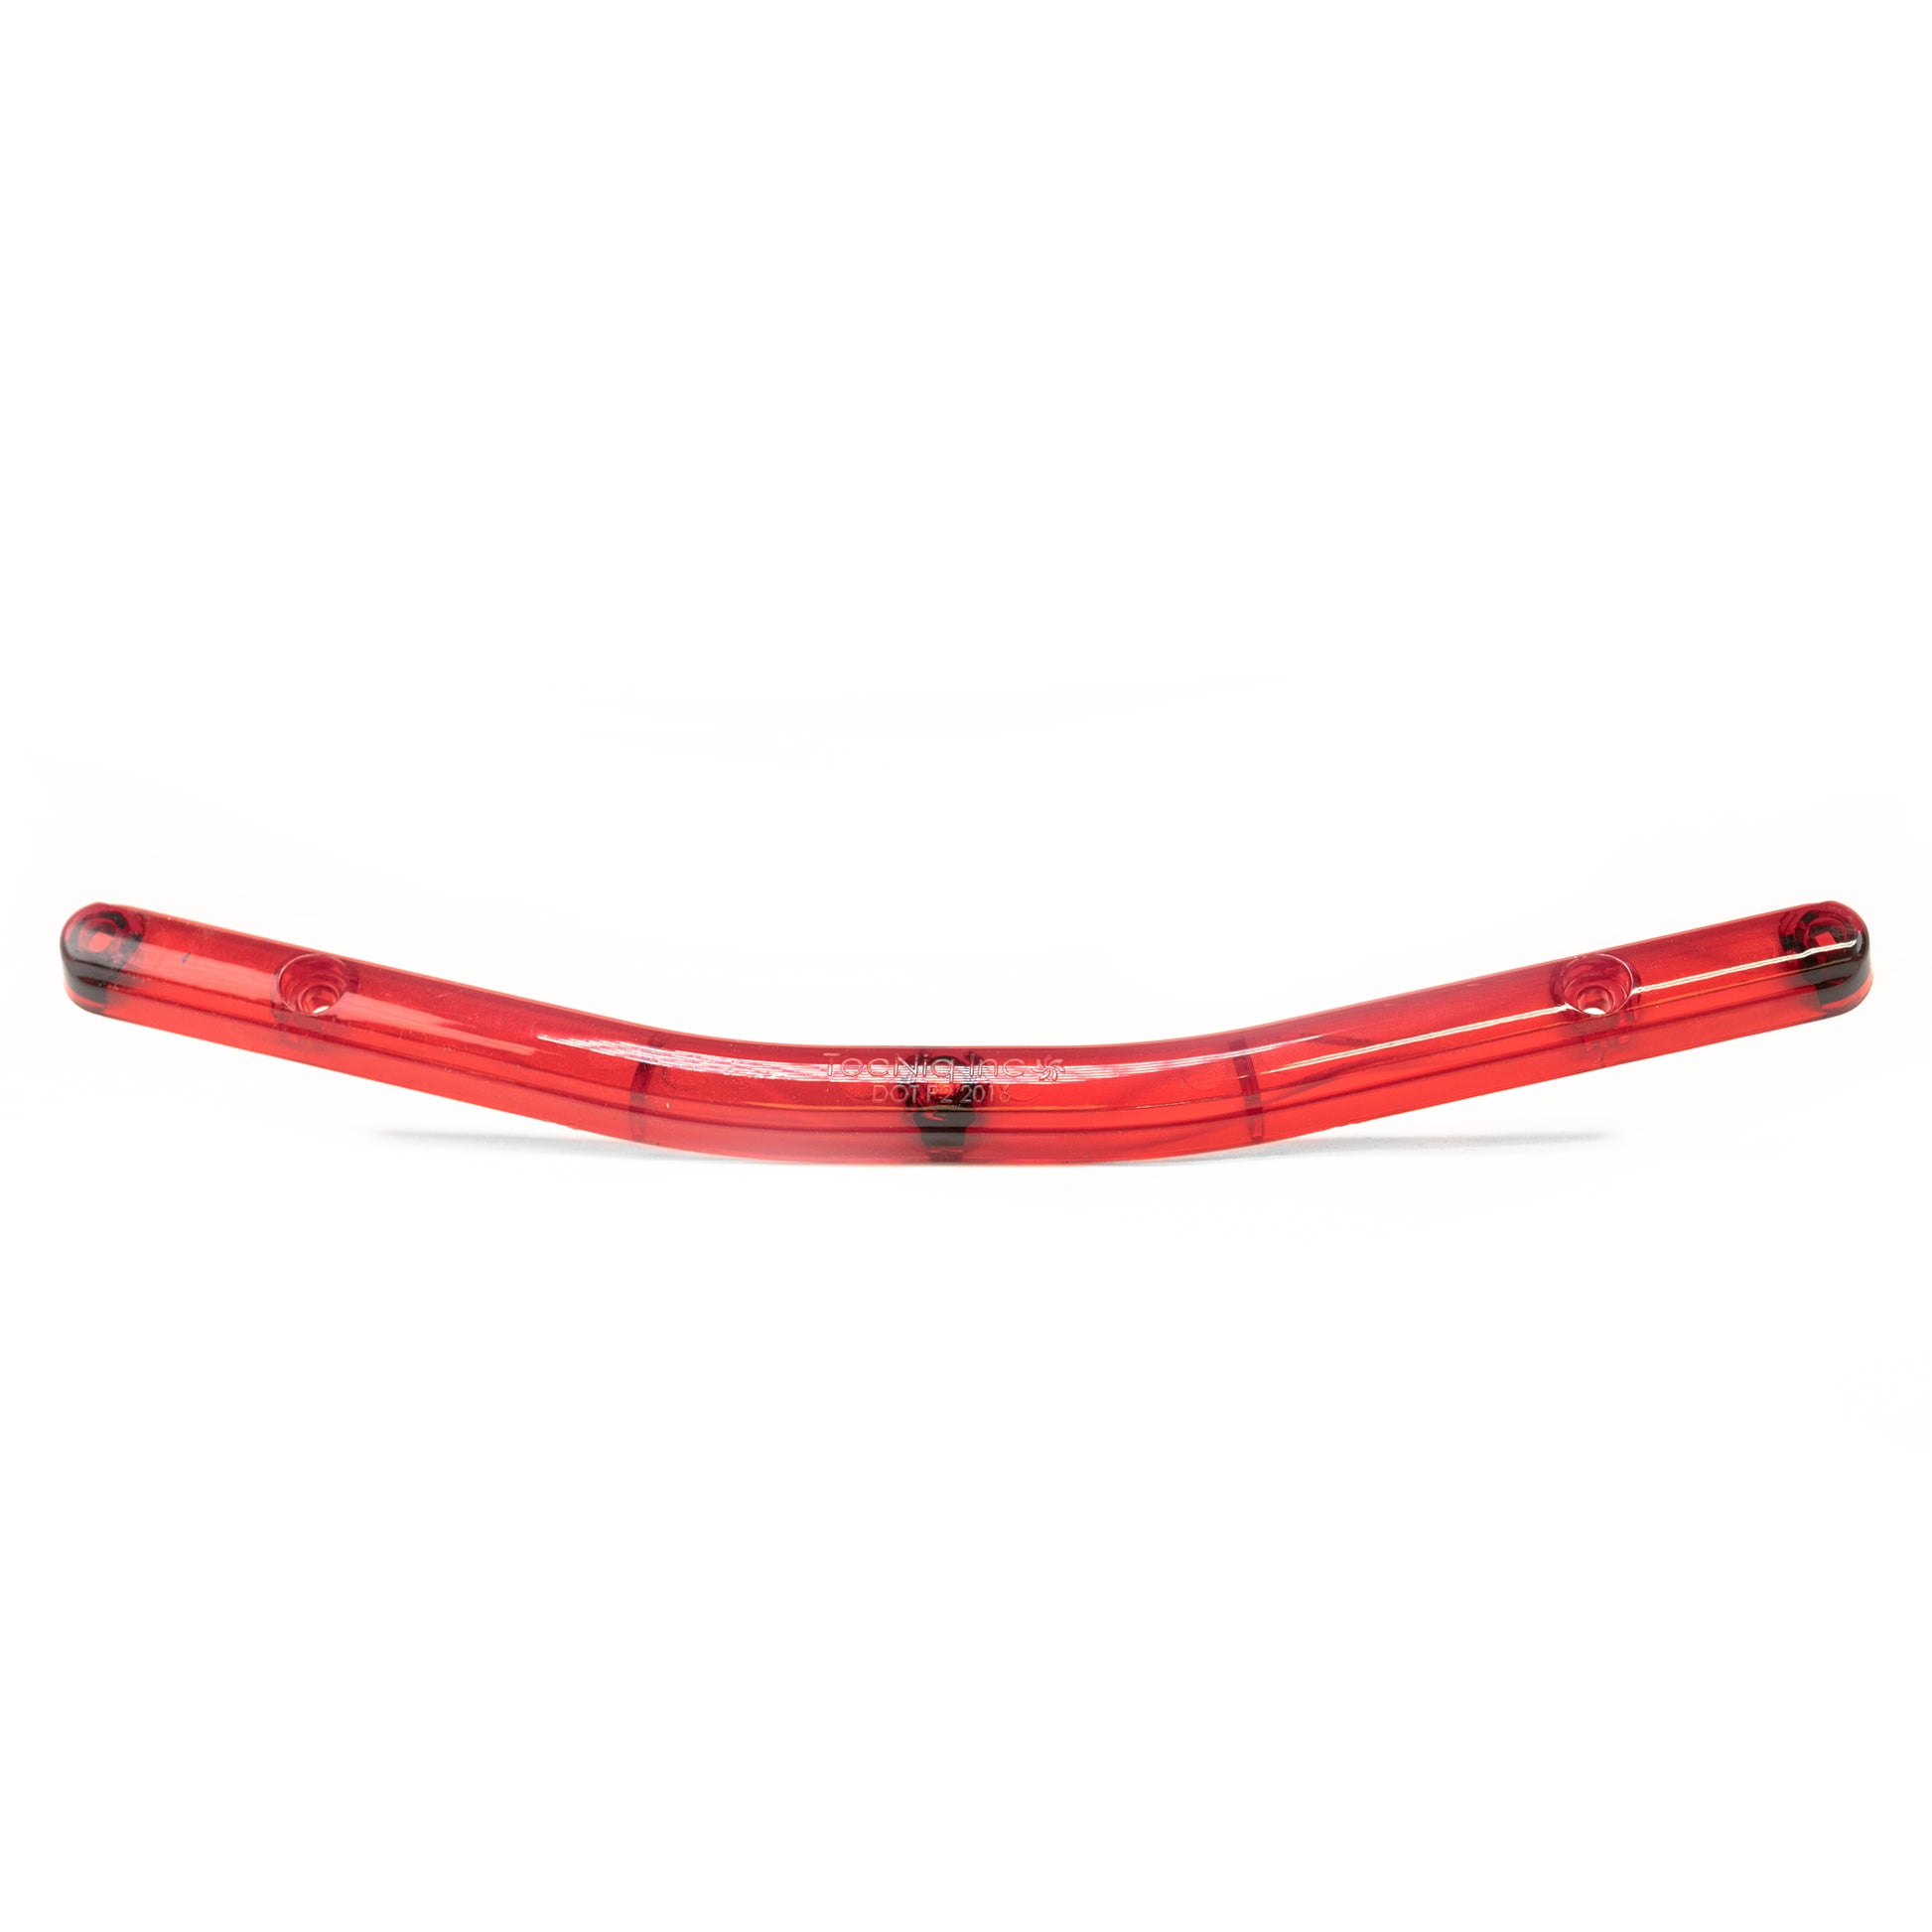 Marine Red LED V-Shaped Over 80" ID Bar W/Pigtail